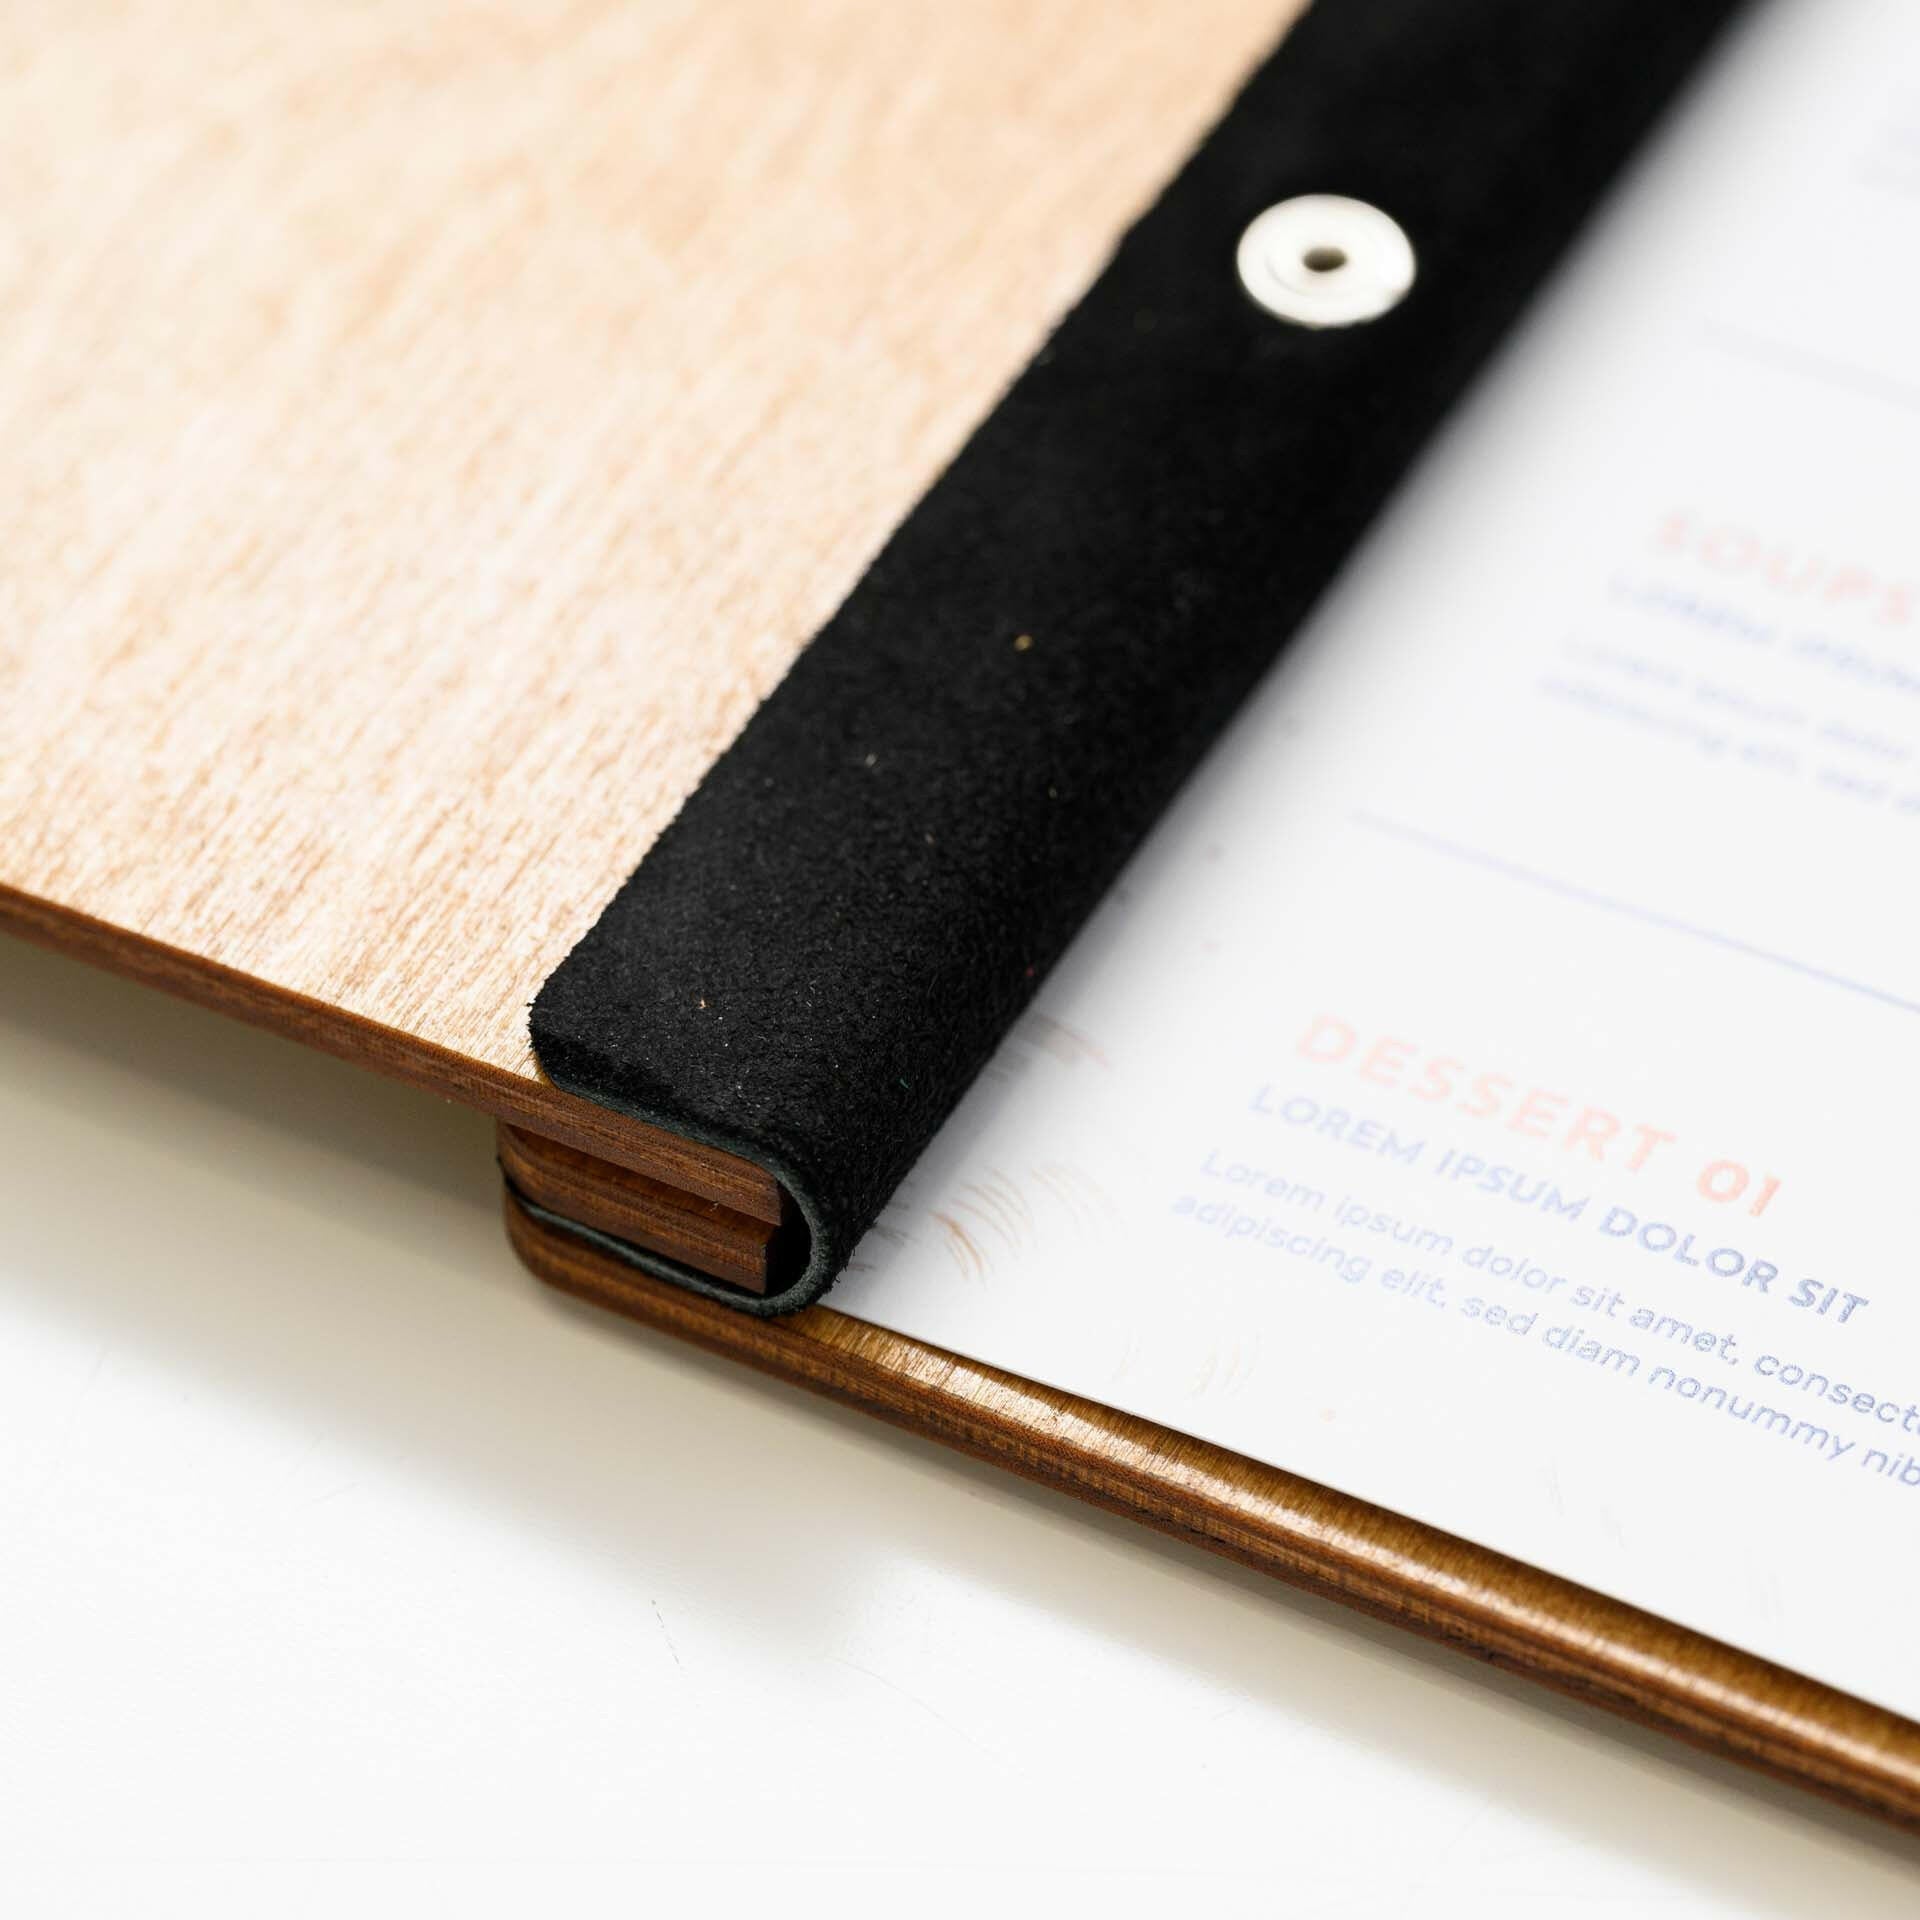 Luxurious Engraved Menu Folder: Adds a touch of elegance to your menu presentation.